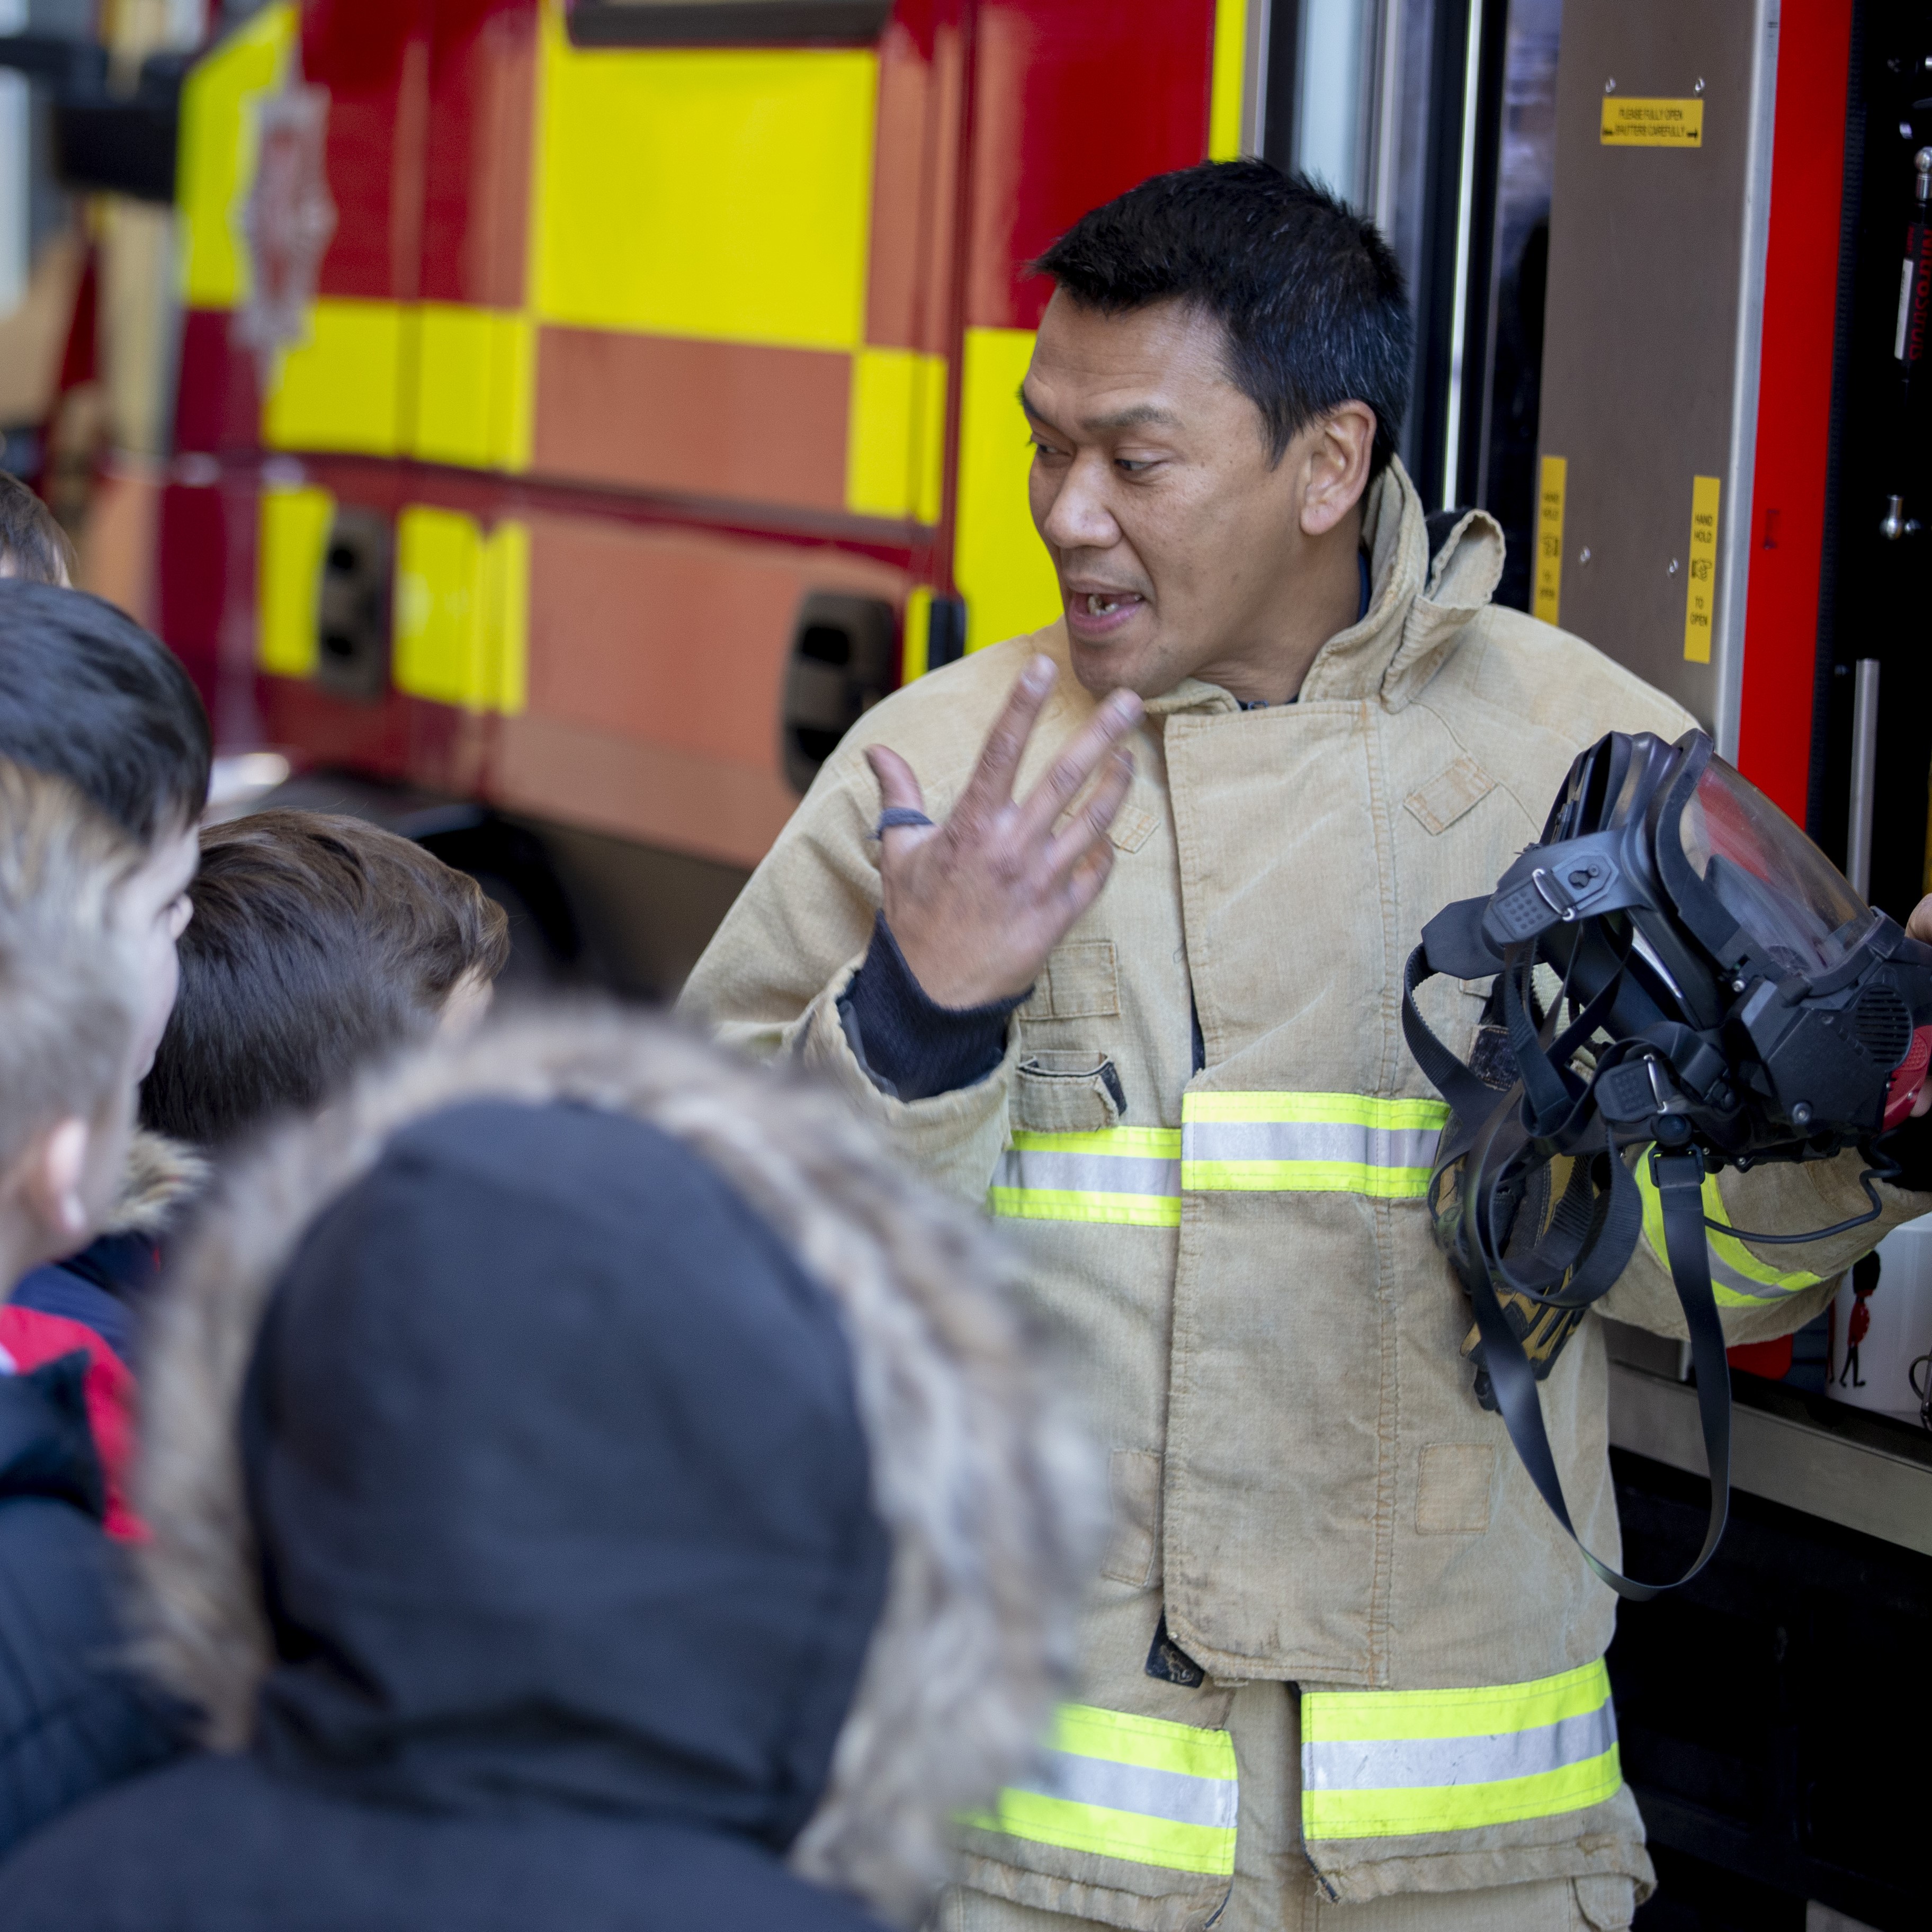 Firefighter talking to young people